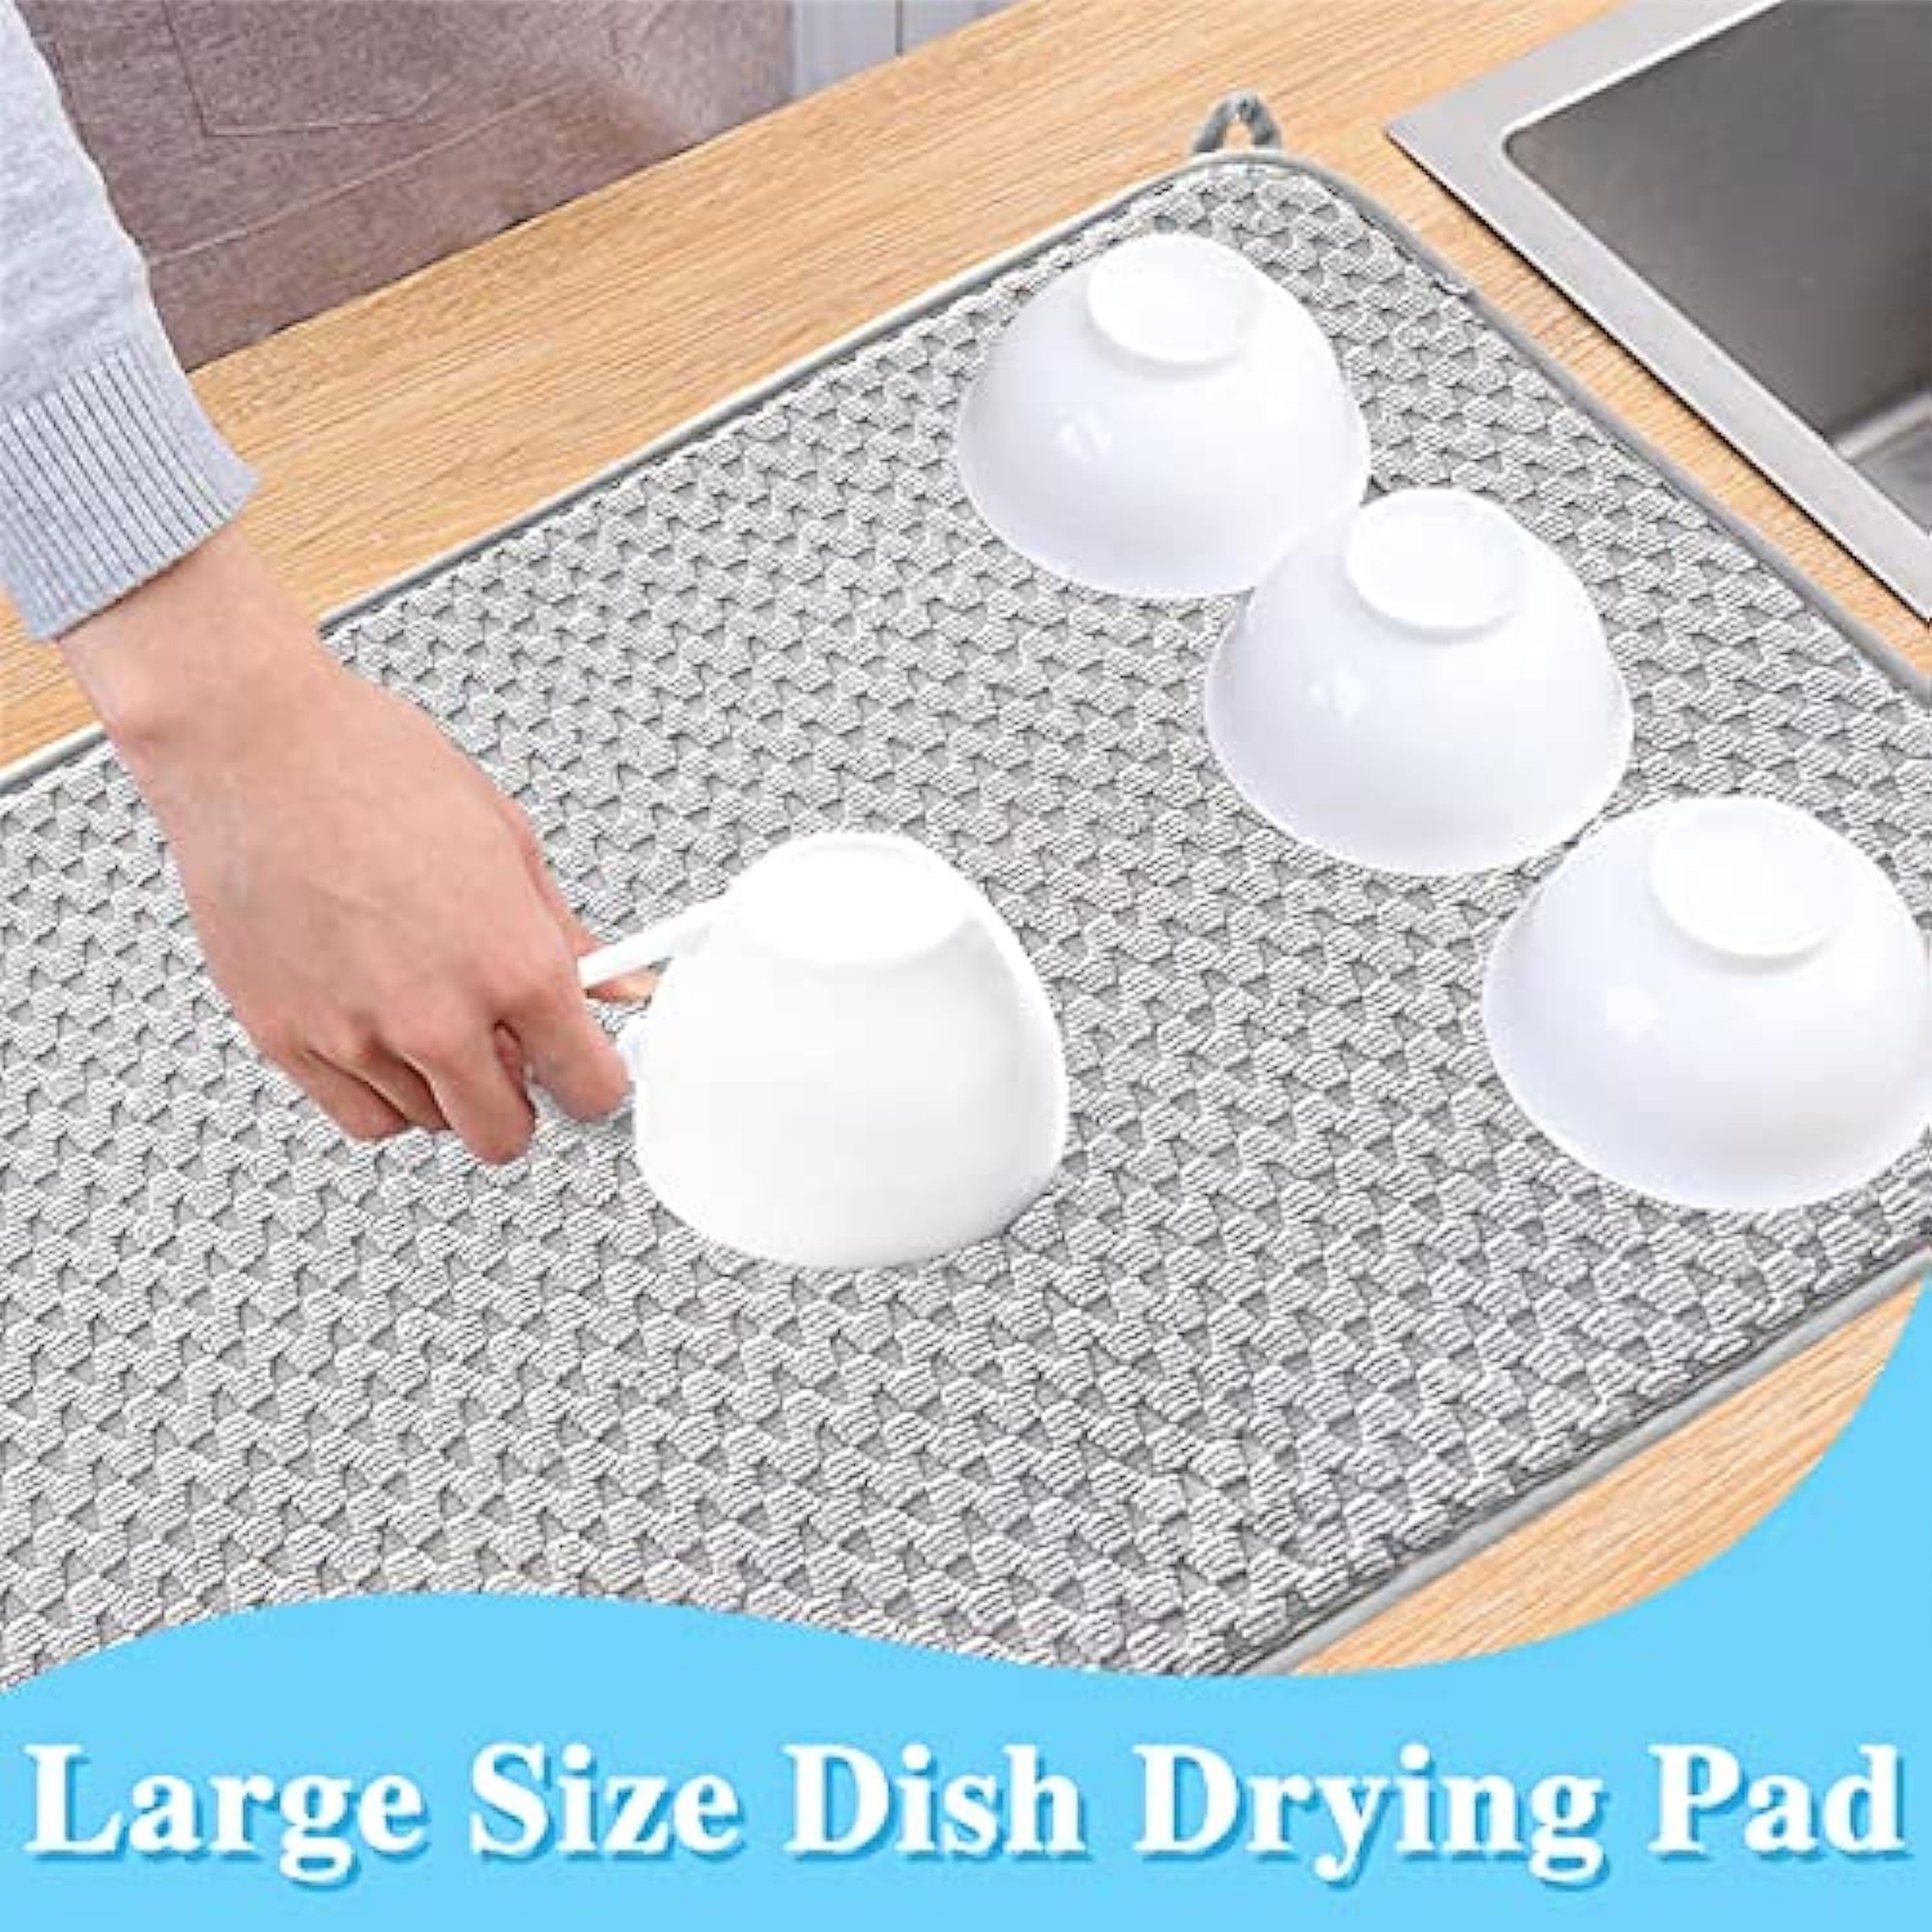  DK177 Dish Drying Mat for Kitchen Counter [Hide Stain